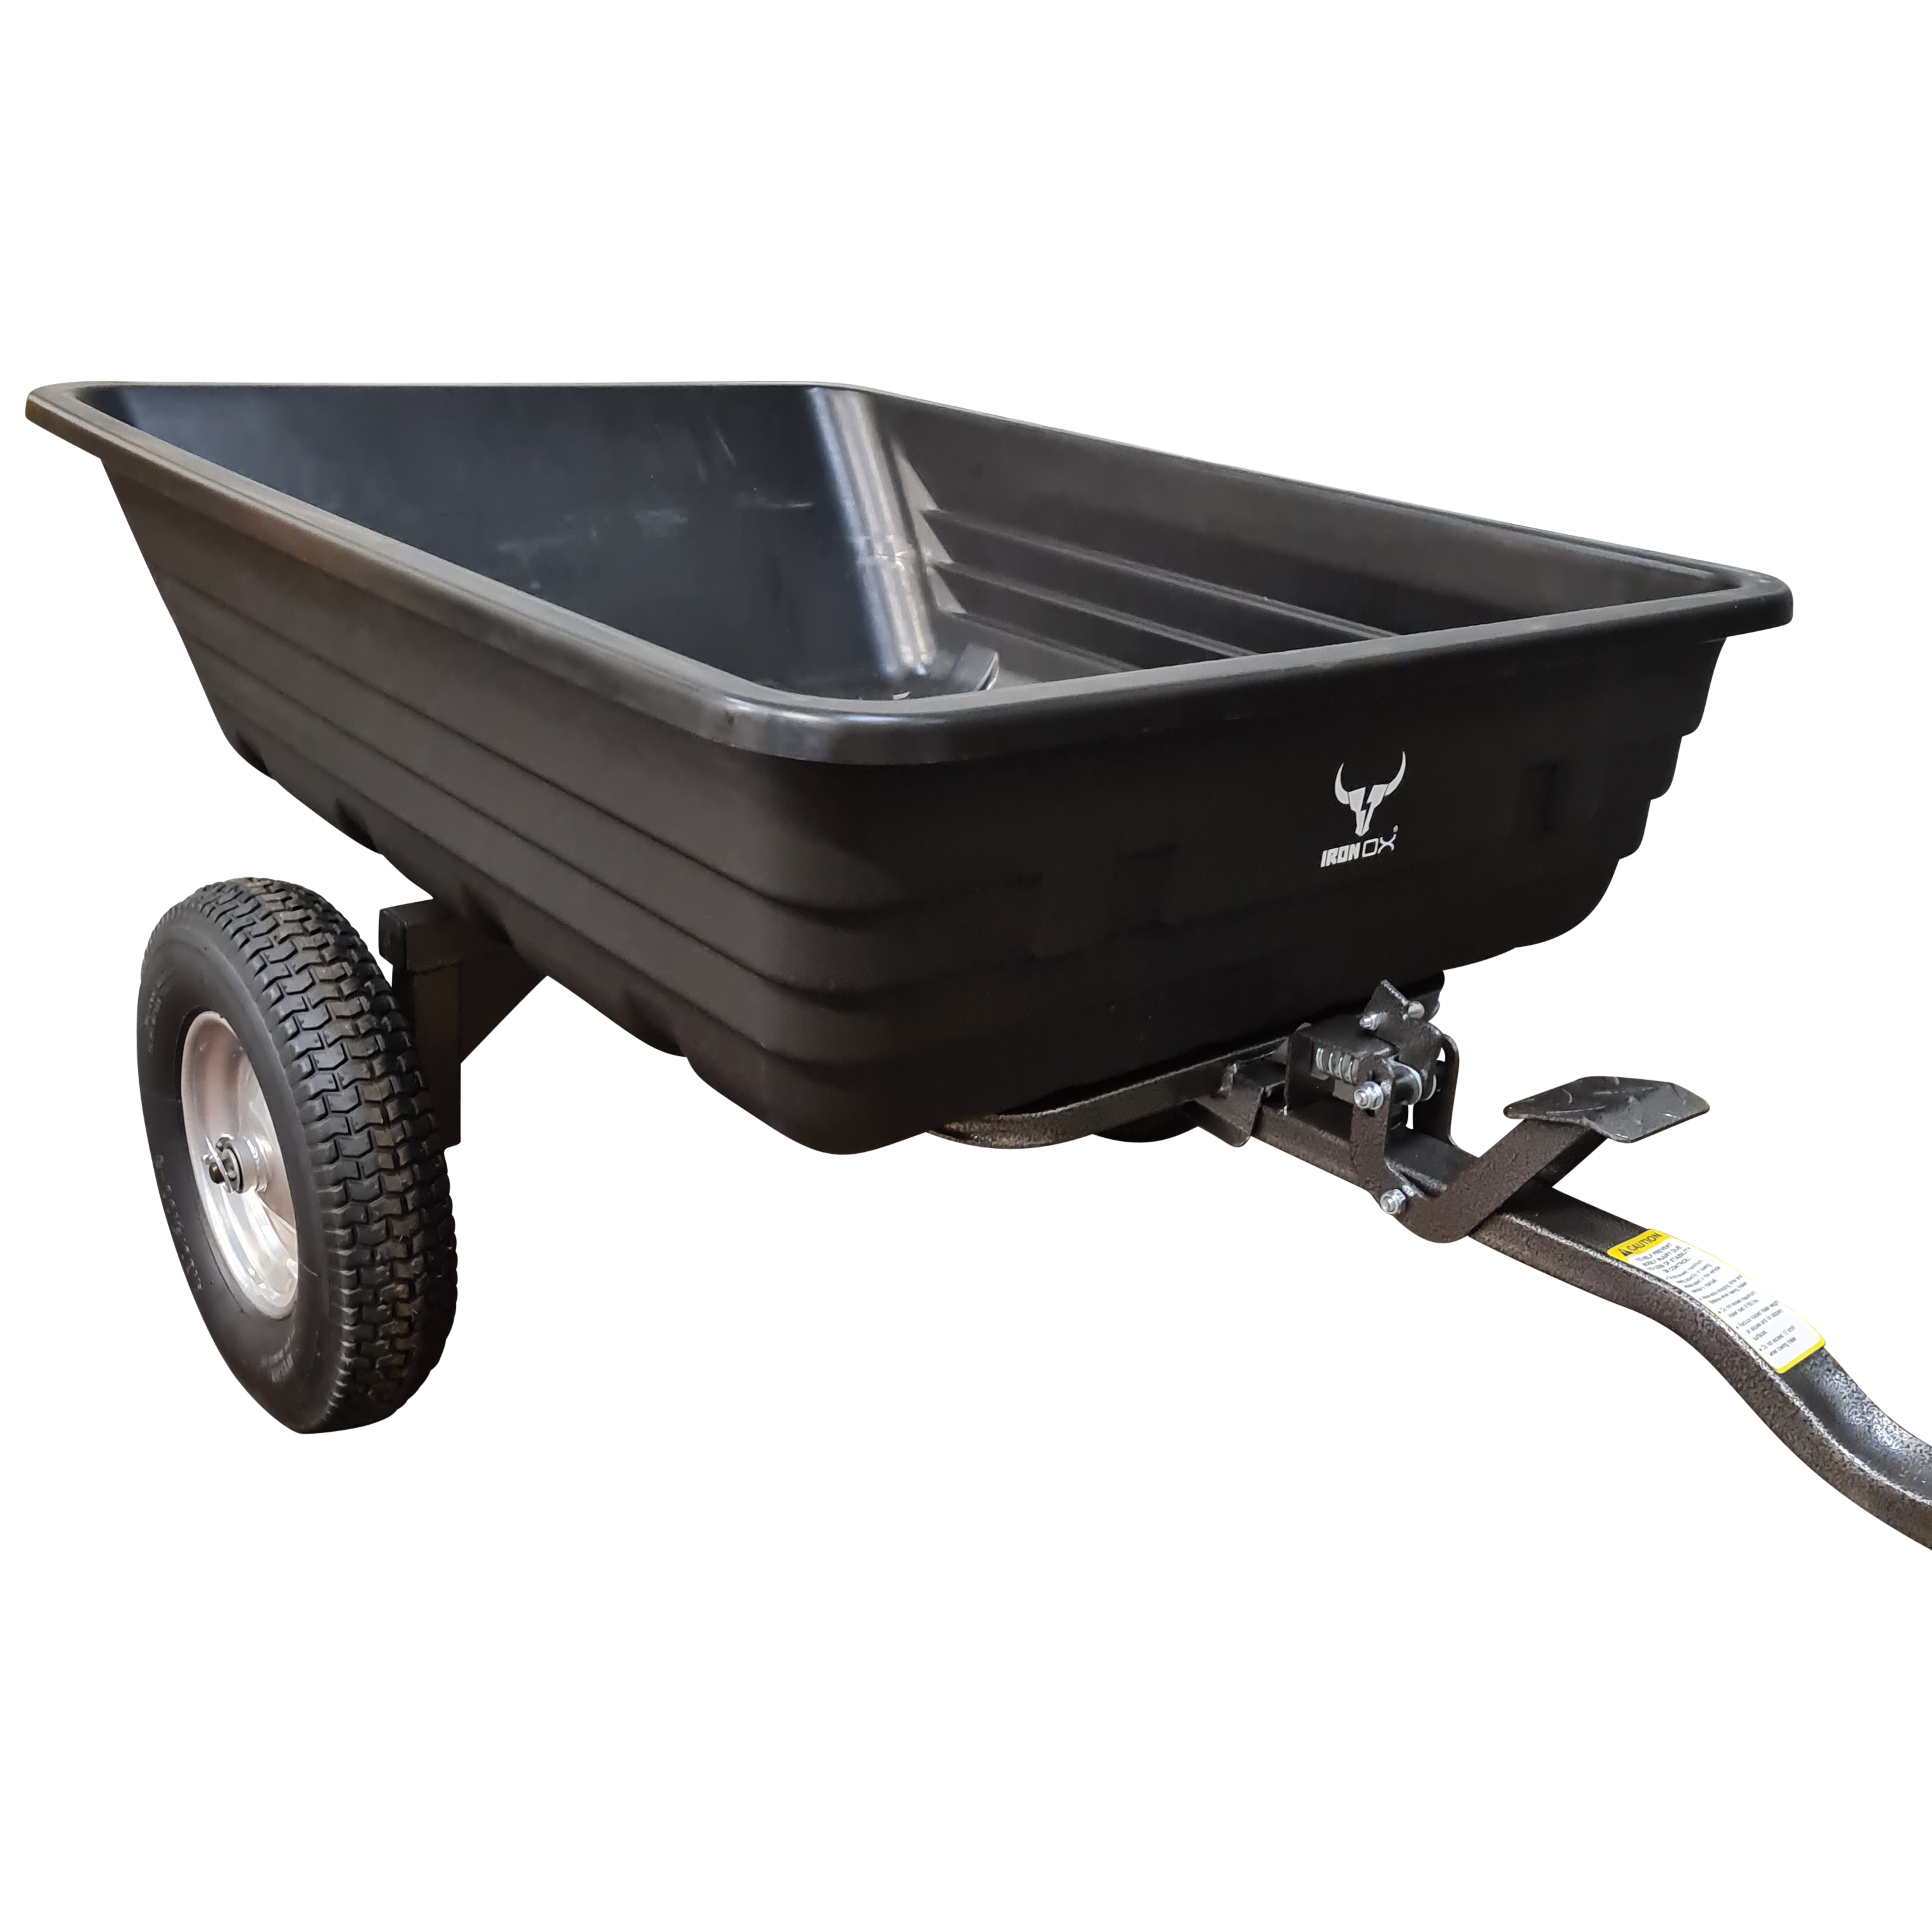 Tipping Trailers for atv or mowers